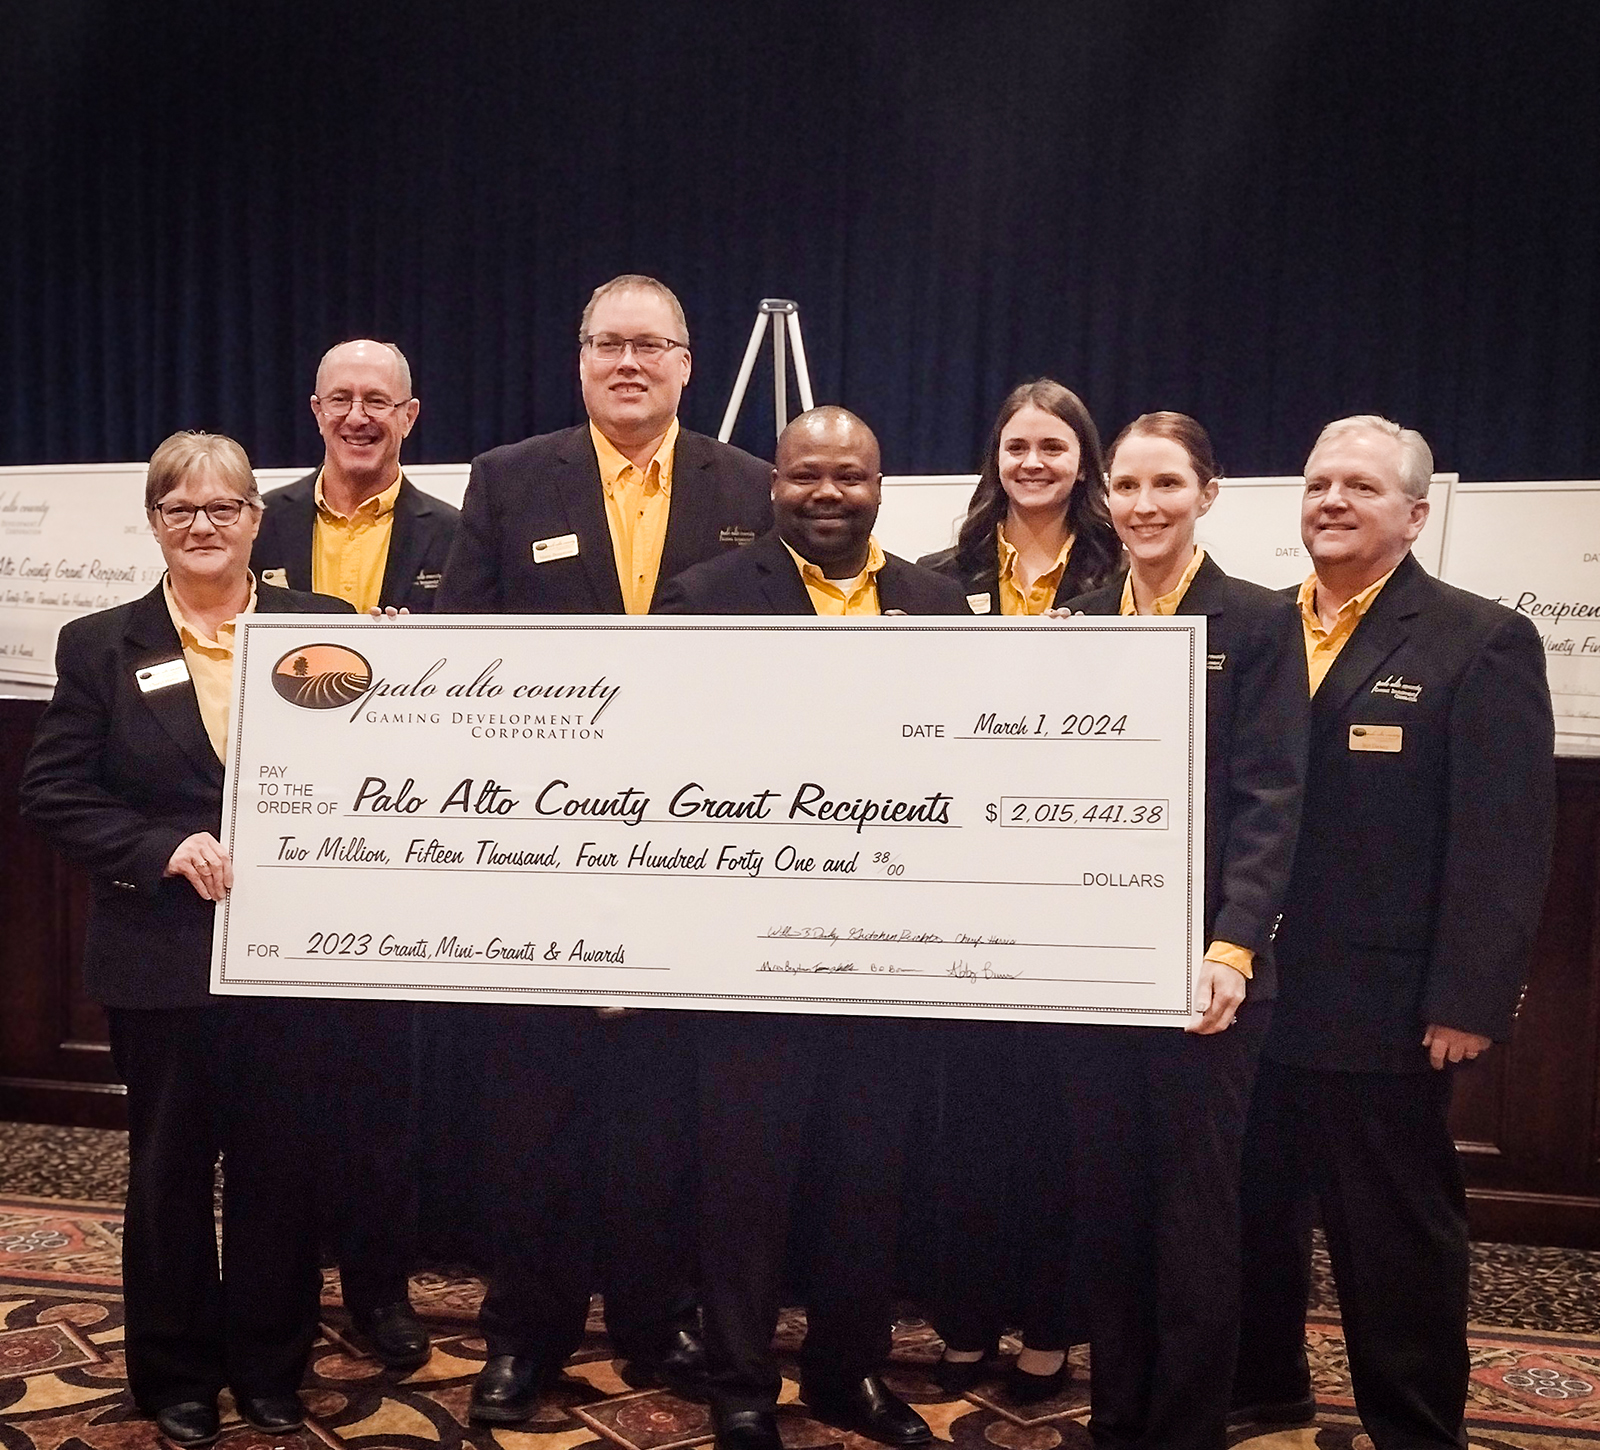 Cheryl Harris, Brian Bormann, Marty Bergstrom, Terry Williams, Gretchen Reichter, Abby Burns, and Bill Dickey pose with the 2023 Palo Alto County Gaming Development Corporation Annual Awards Ceremony Grant check.